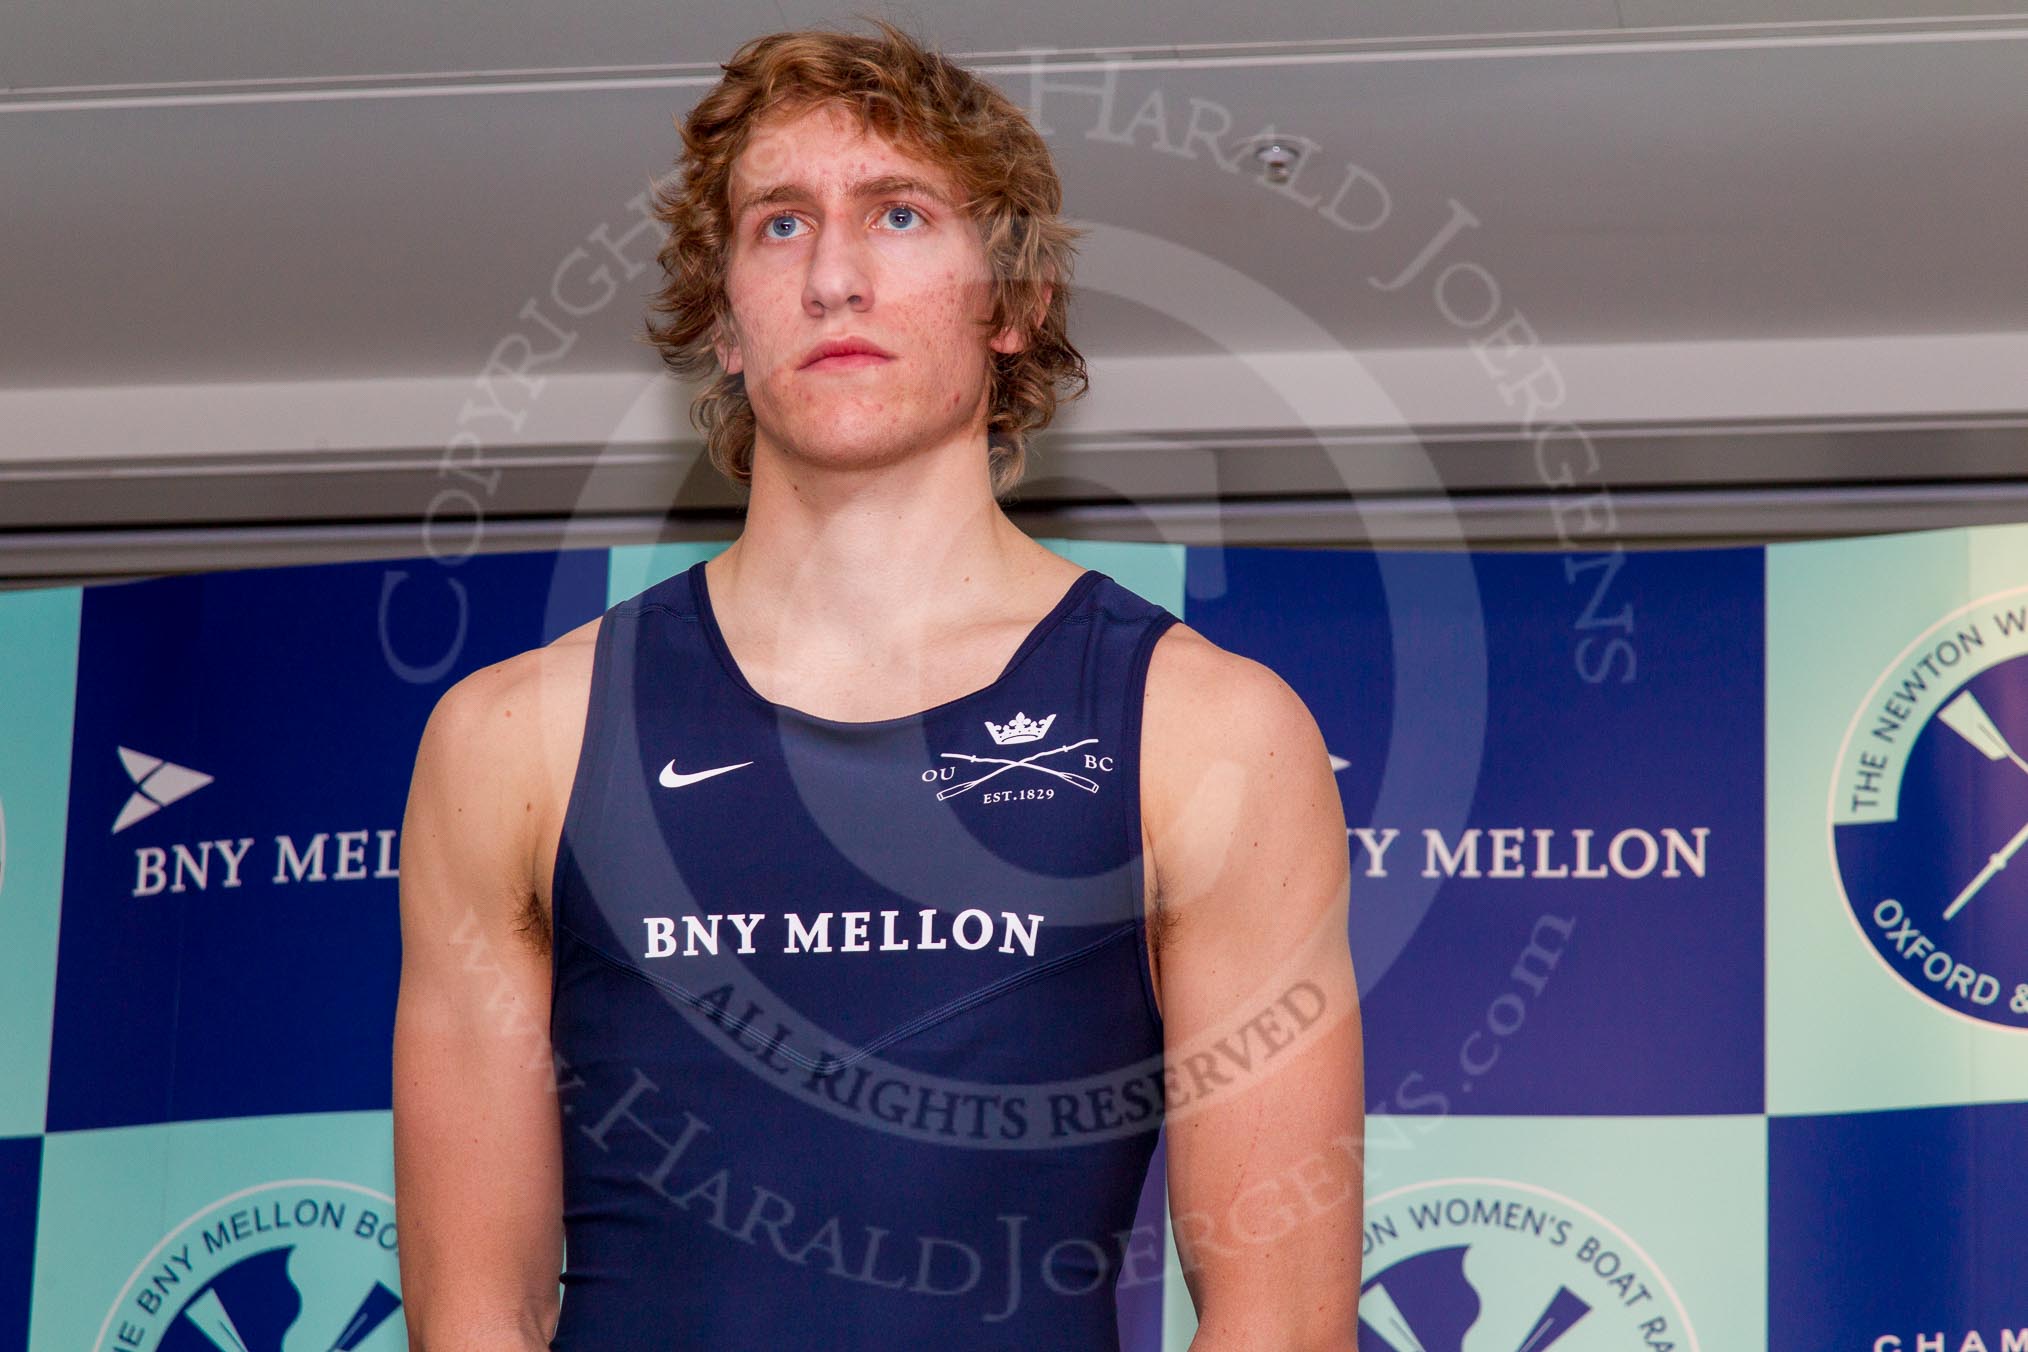 The Boat Race season 2014 - Crew Announcement and Weigh In: The 2014 Boat Race crews: Oxford 4 seat Thomas Swartz, 81.2kg..
BNY Mellon Centre,
London EC4V 4LA,
London,
United Kingdom,
on 10 March 2014 at 12:01, image #91